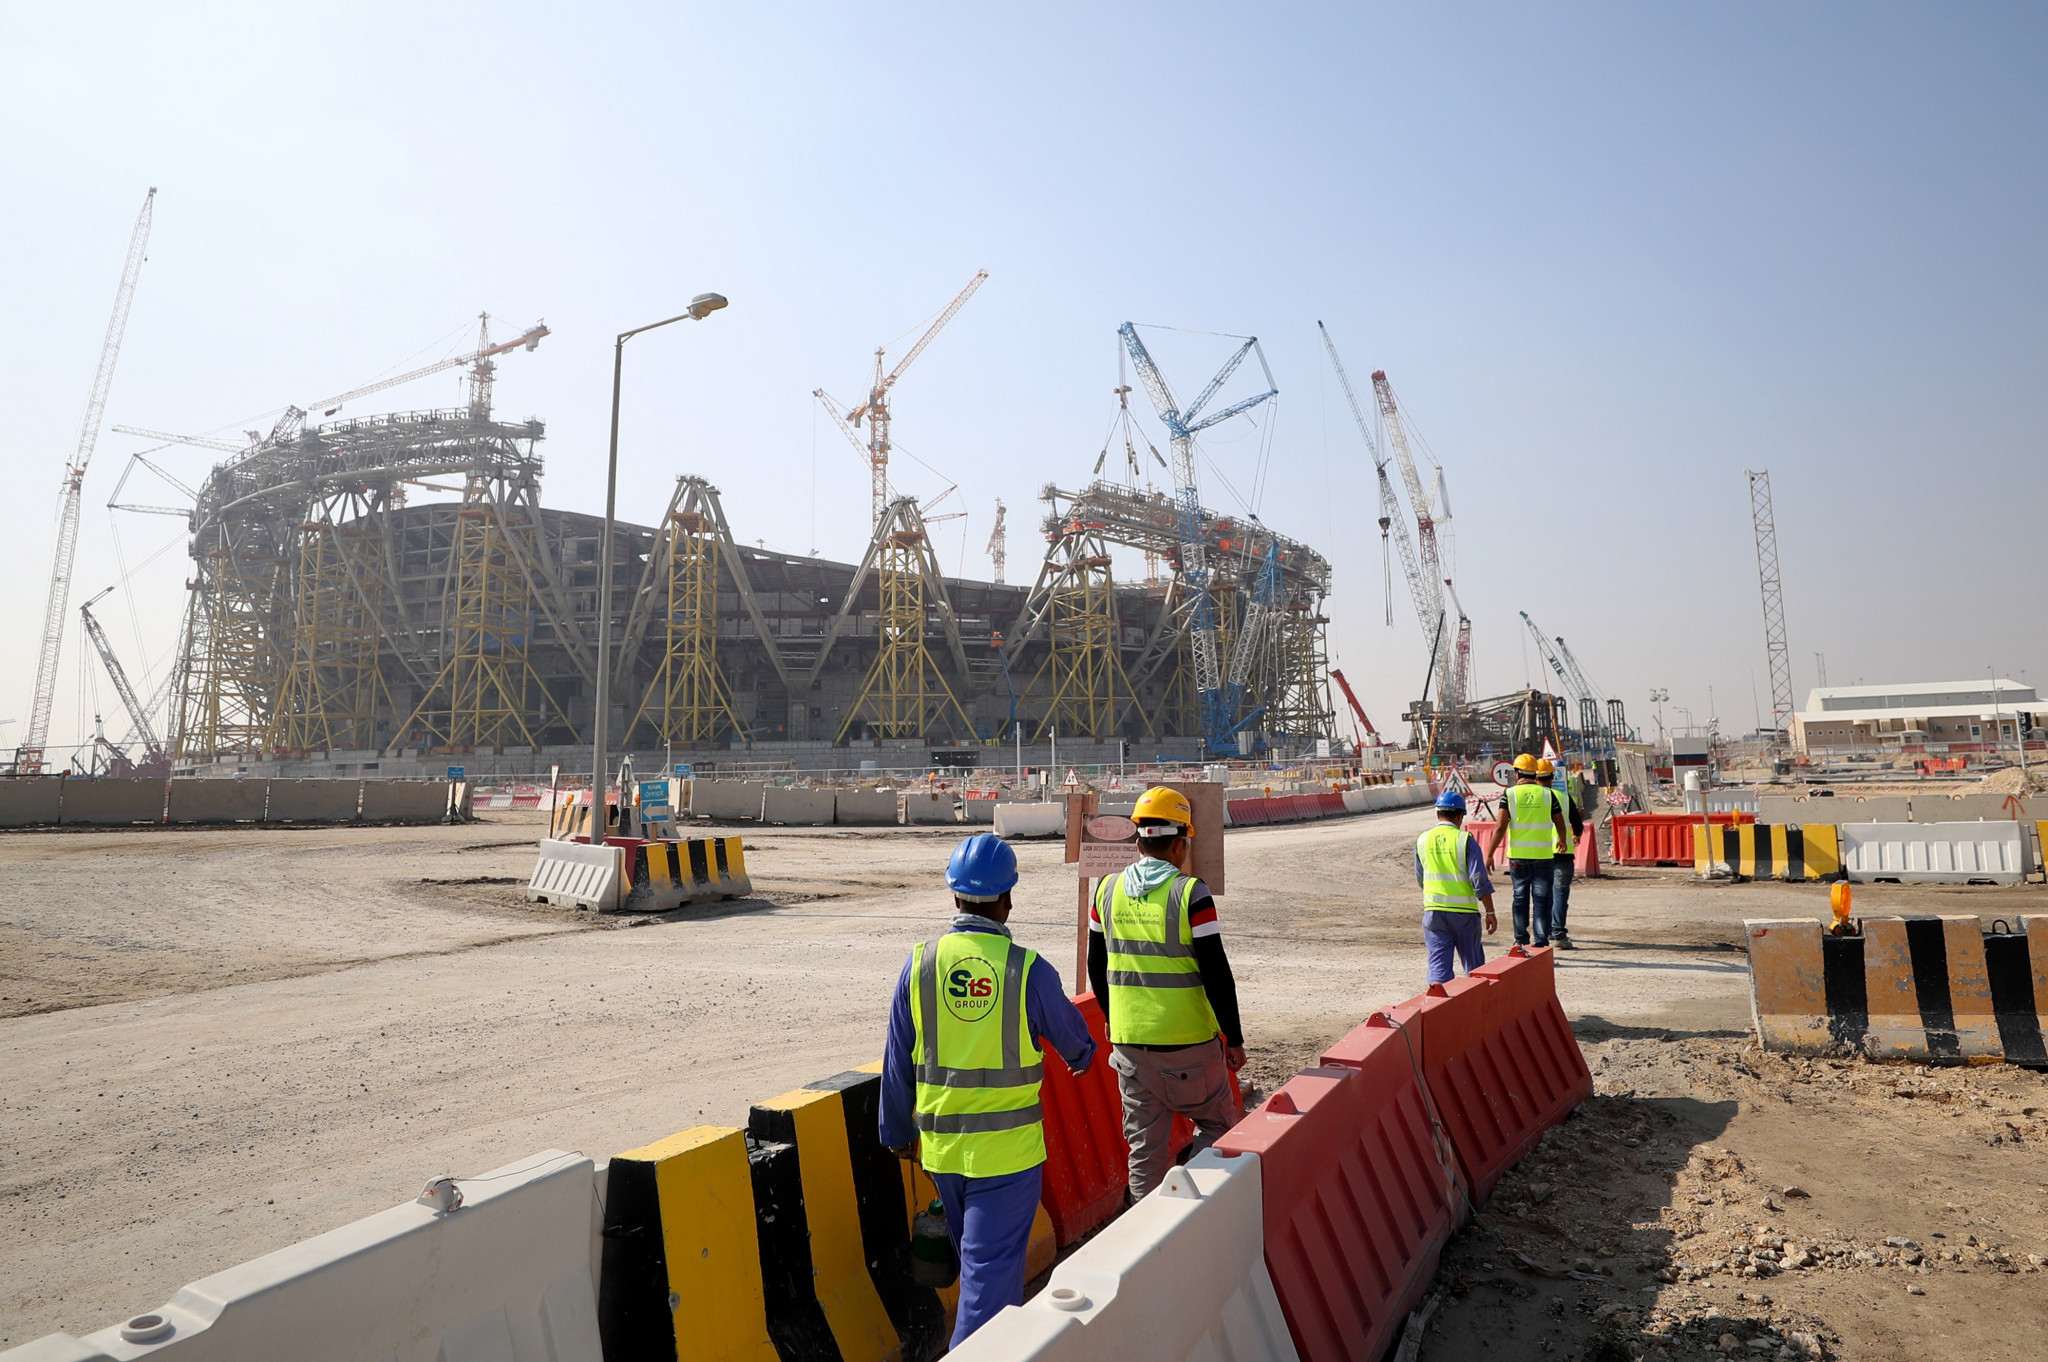 Qatar has been criticised for its treatment of migrant workers as work continues on the Lusail Stadium ©Getty Images